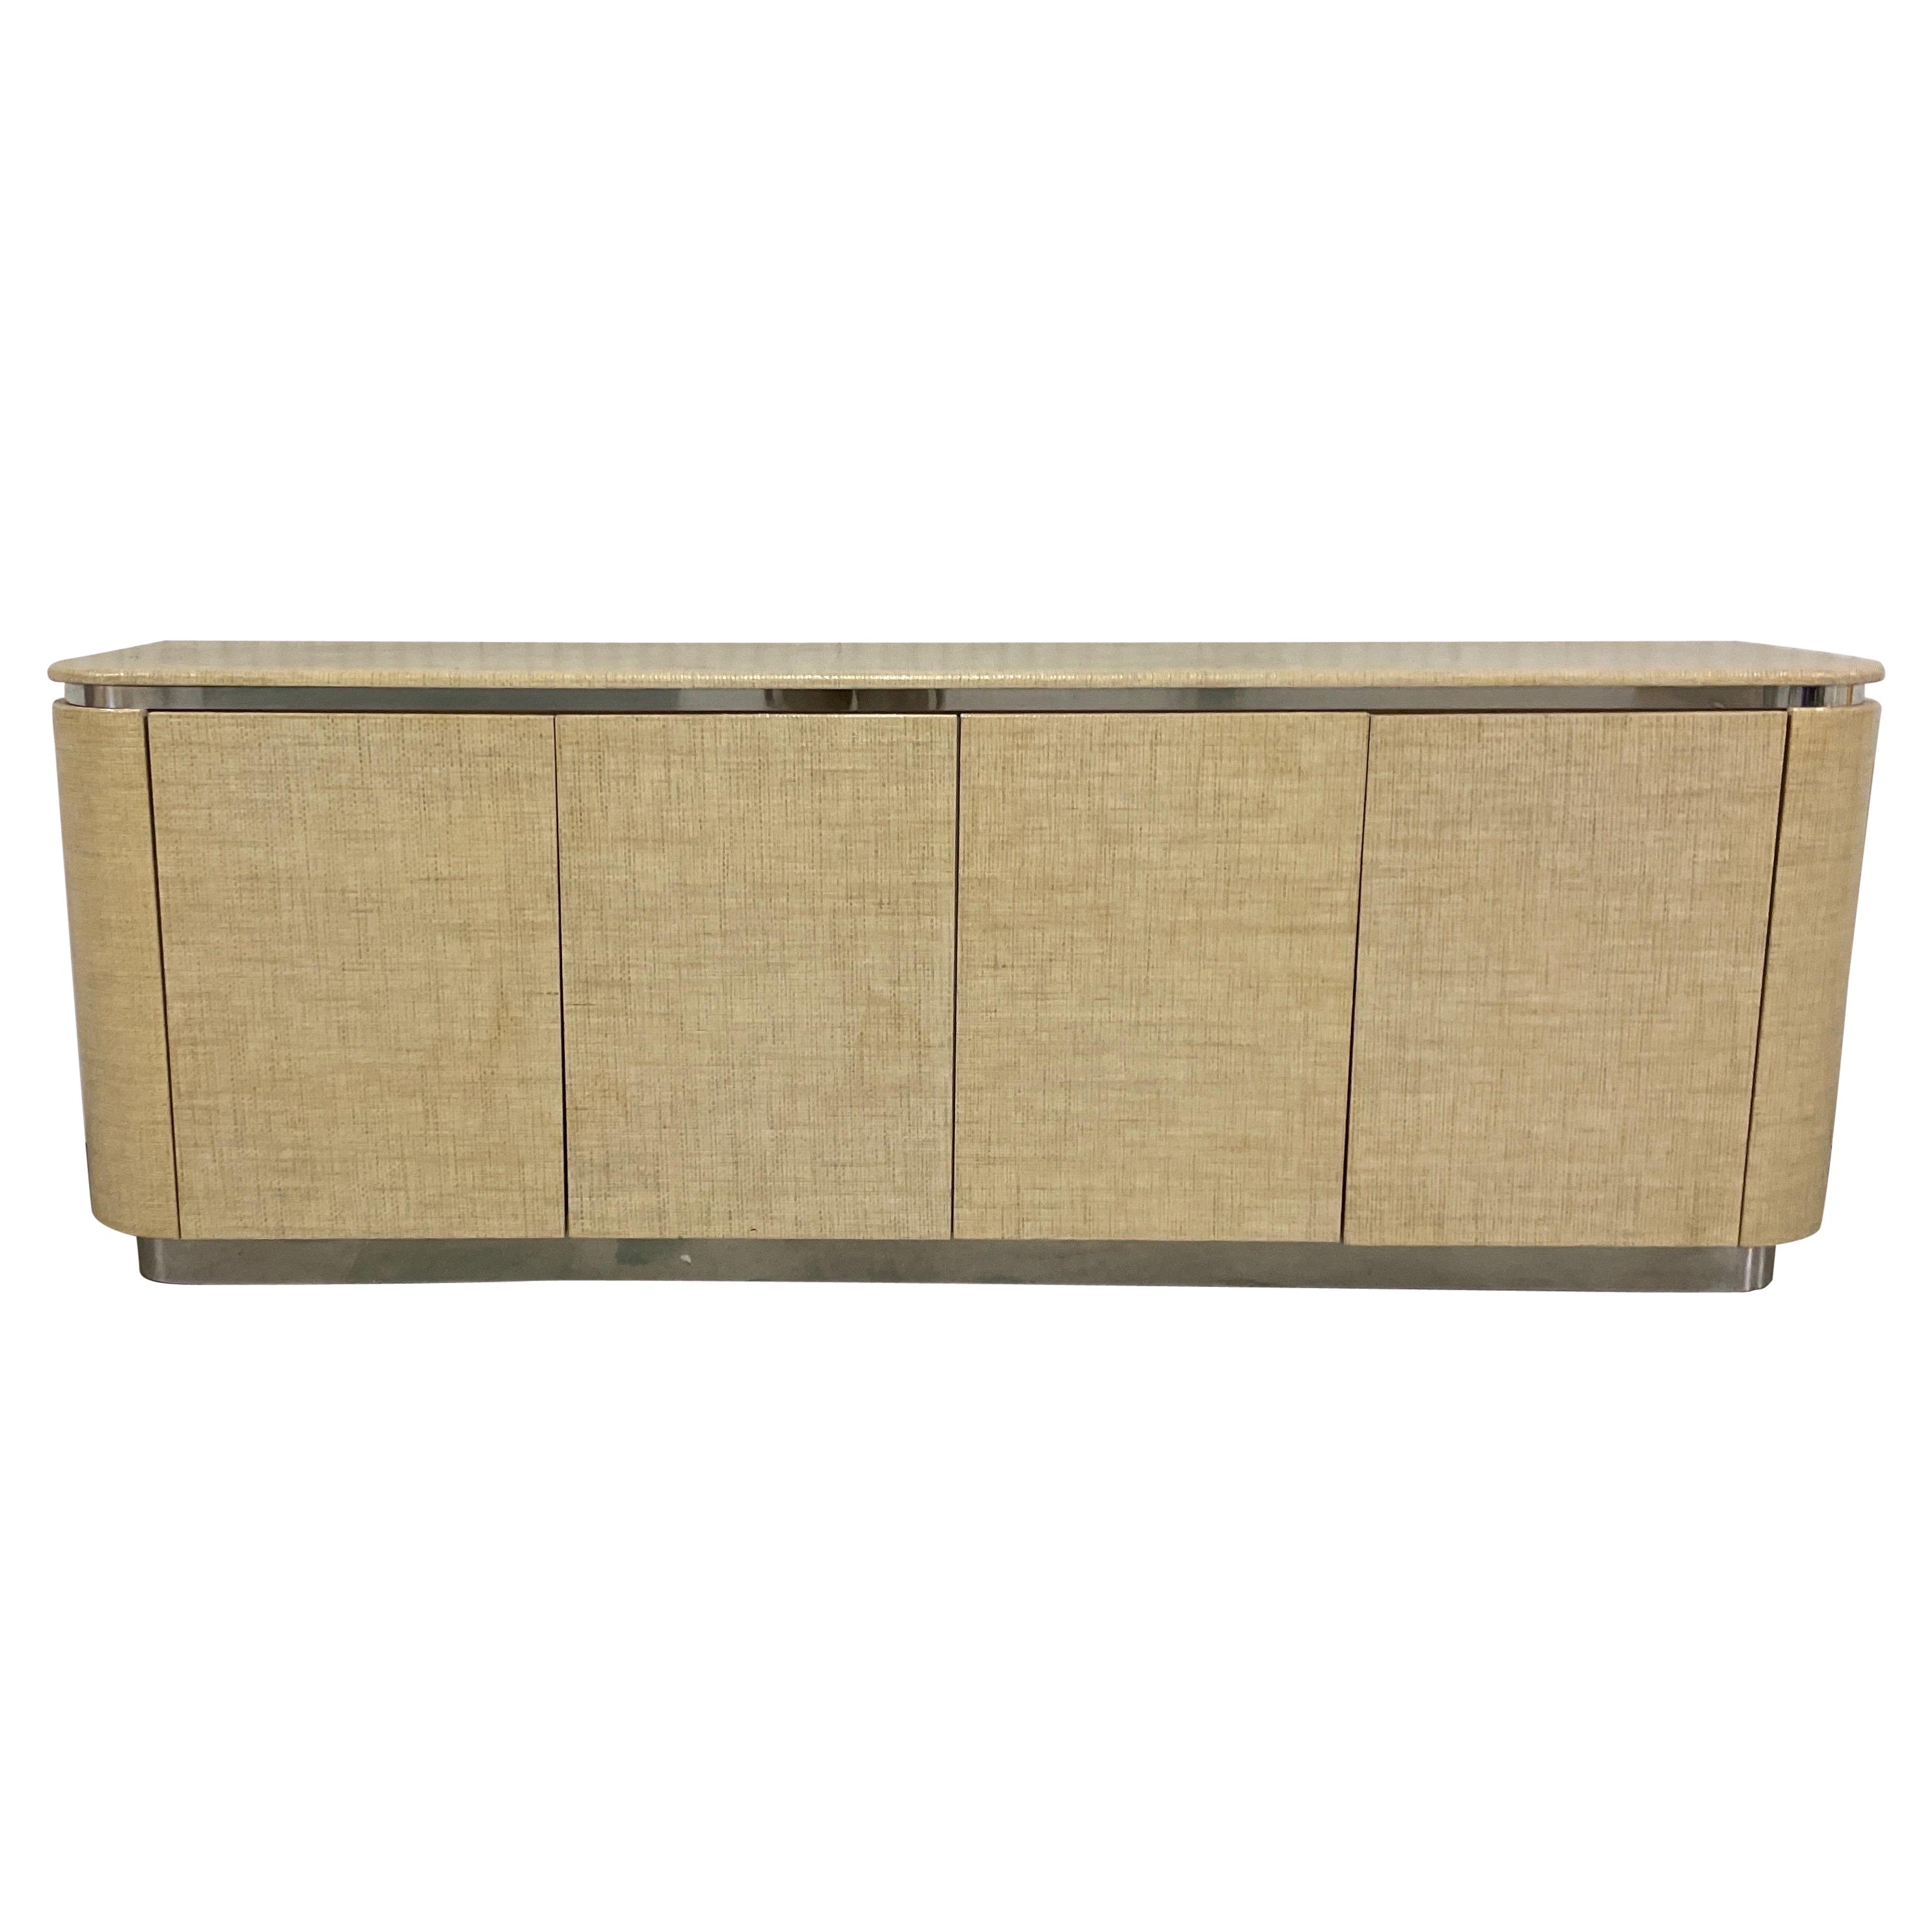 Raffia Wrapped Four Door Credenza in the Style of Karl Springer